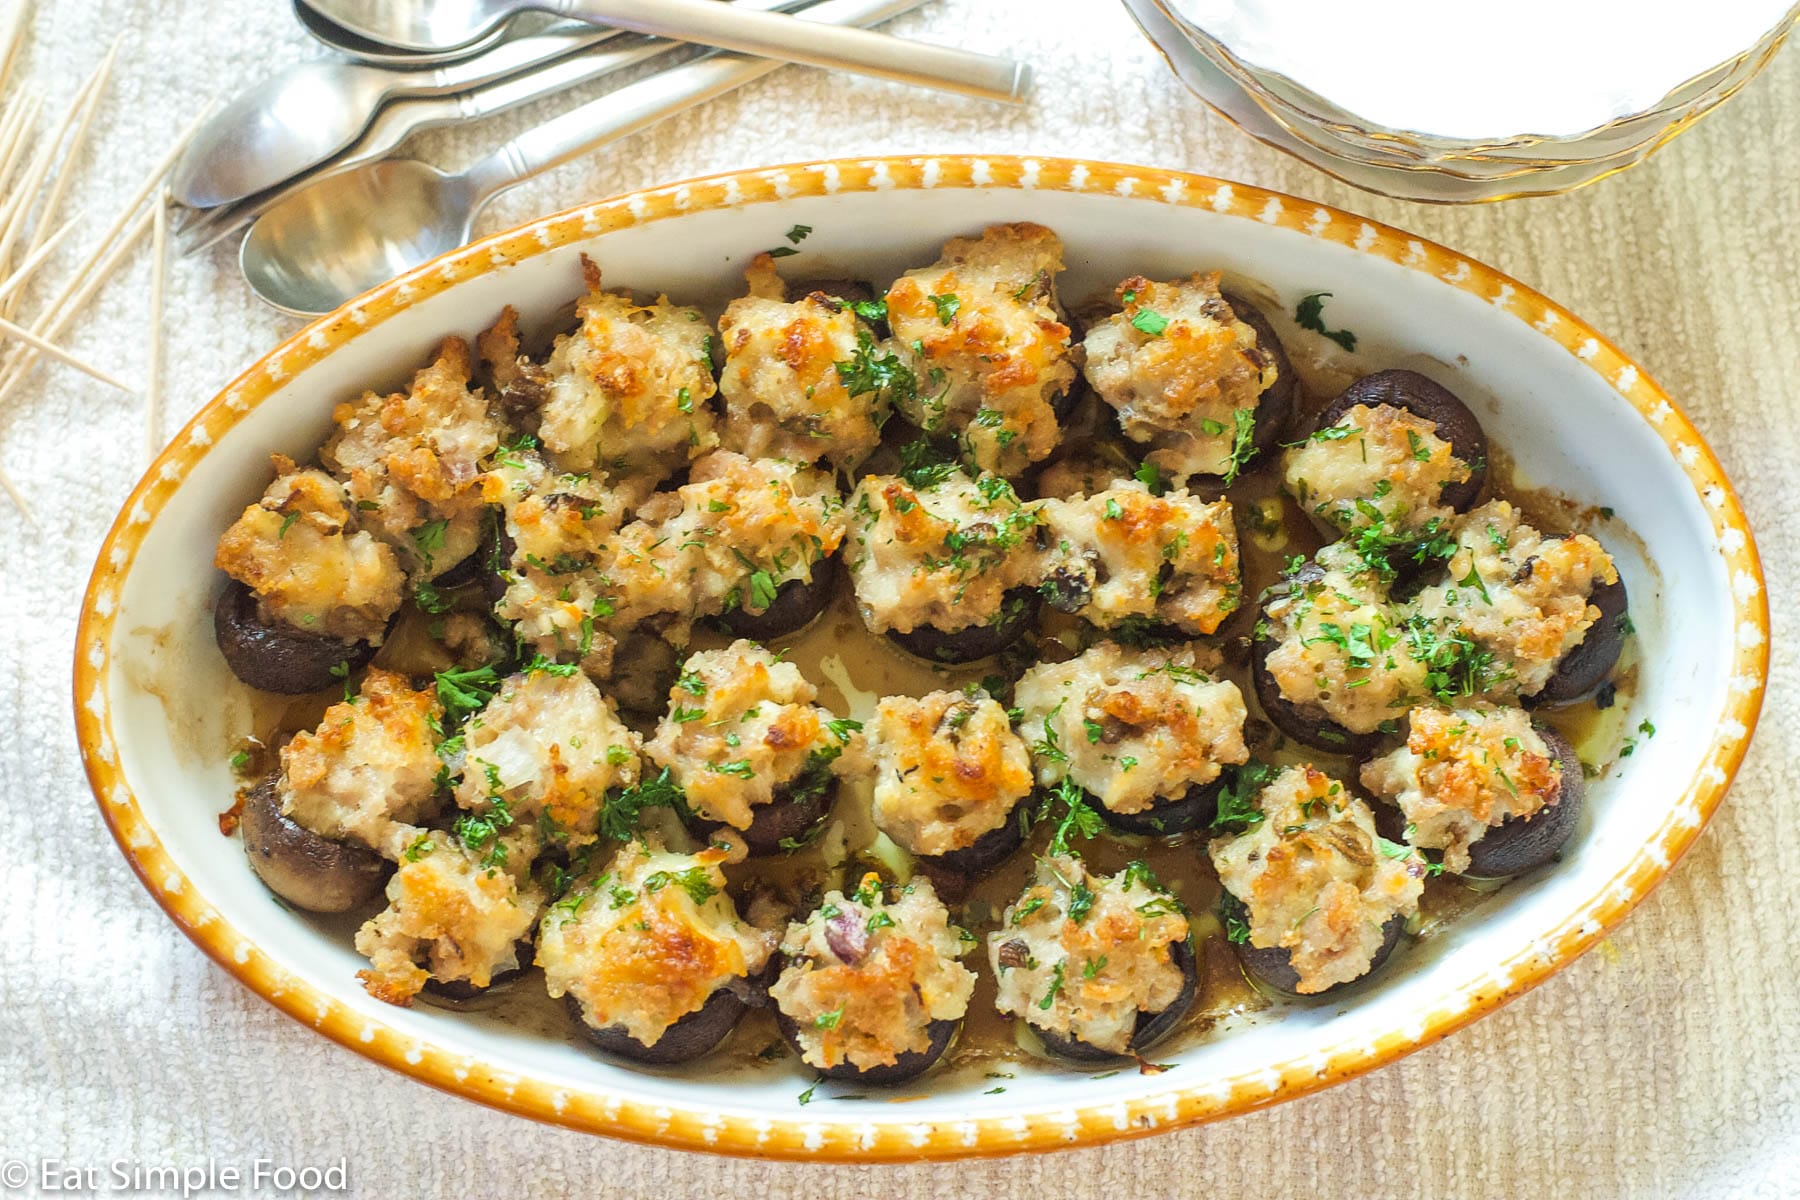 Sausage & Cheese Stuffed Mushrooms in Yellow & White Baking Pan with a parsley garnish. Top View.